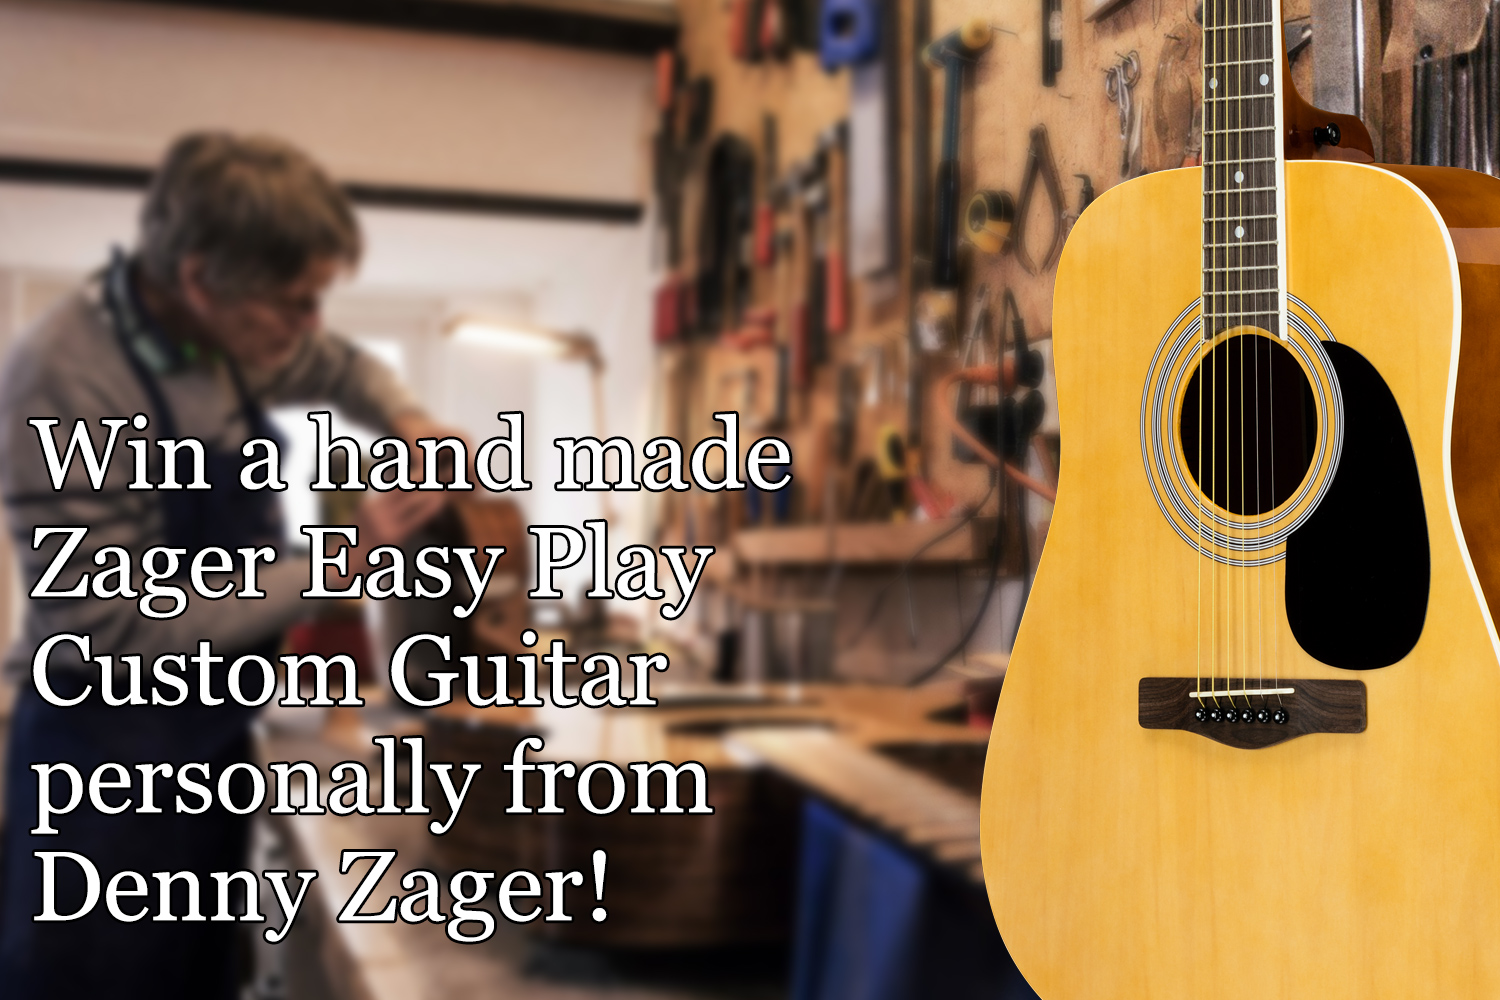 Zager Guitar Giveaway